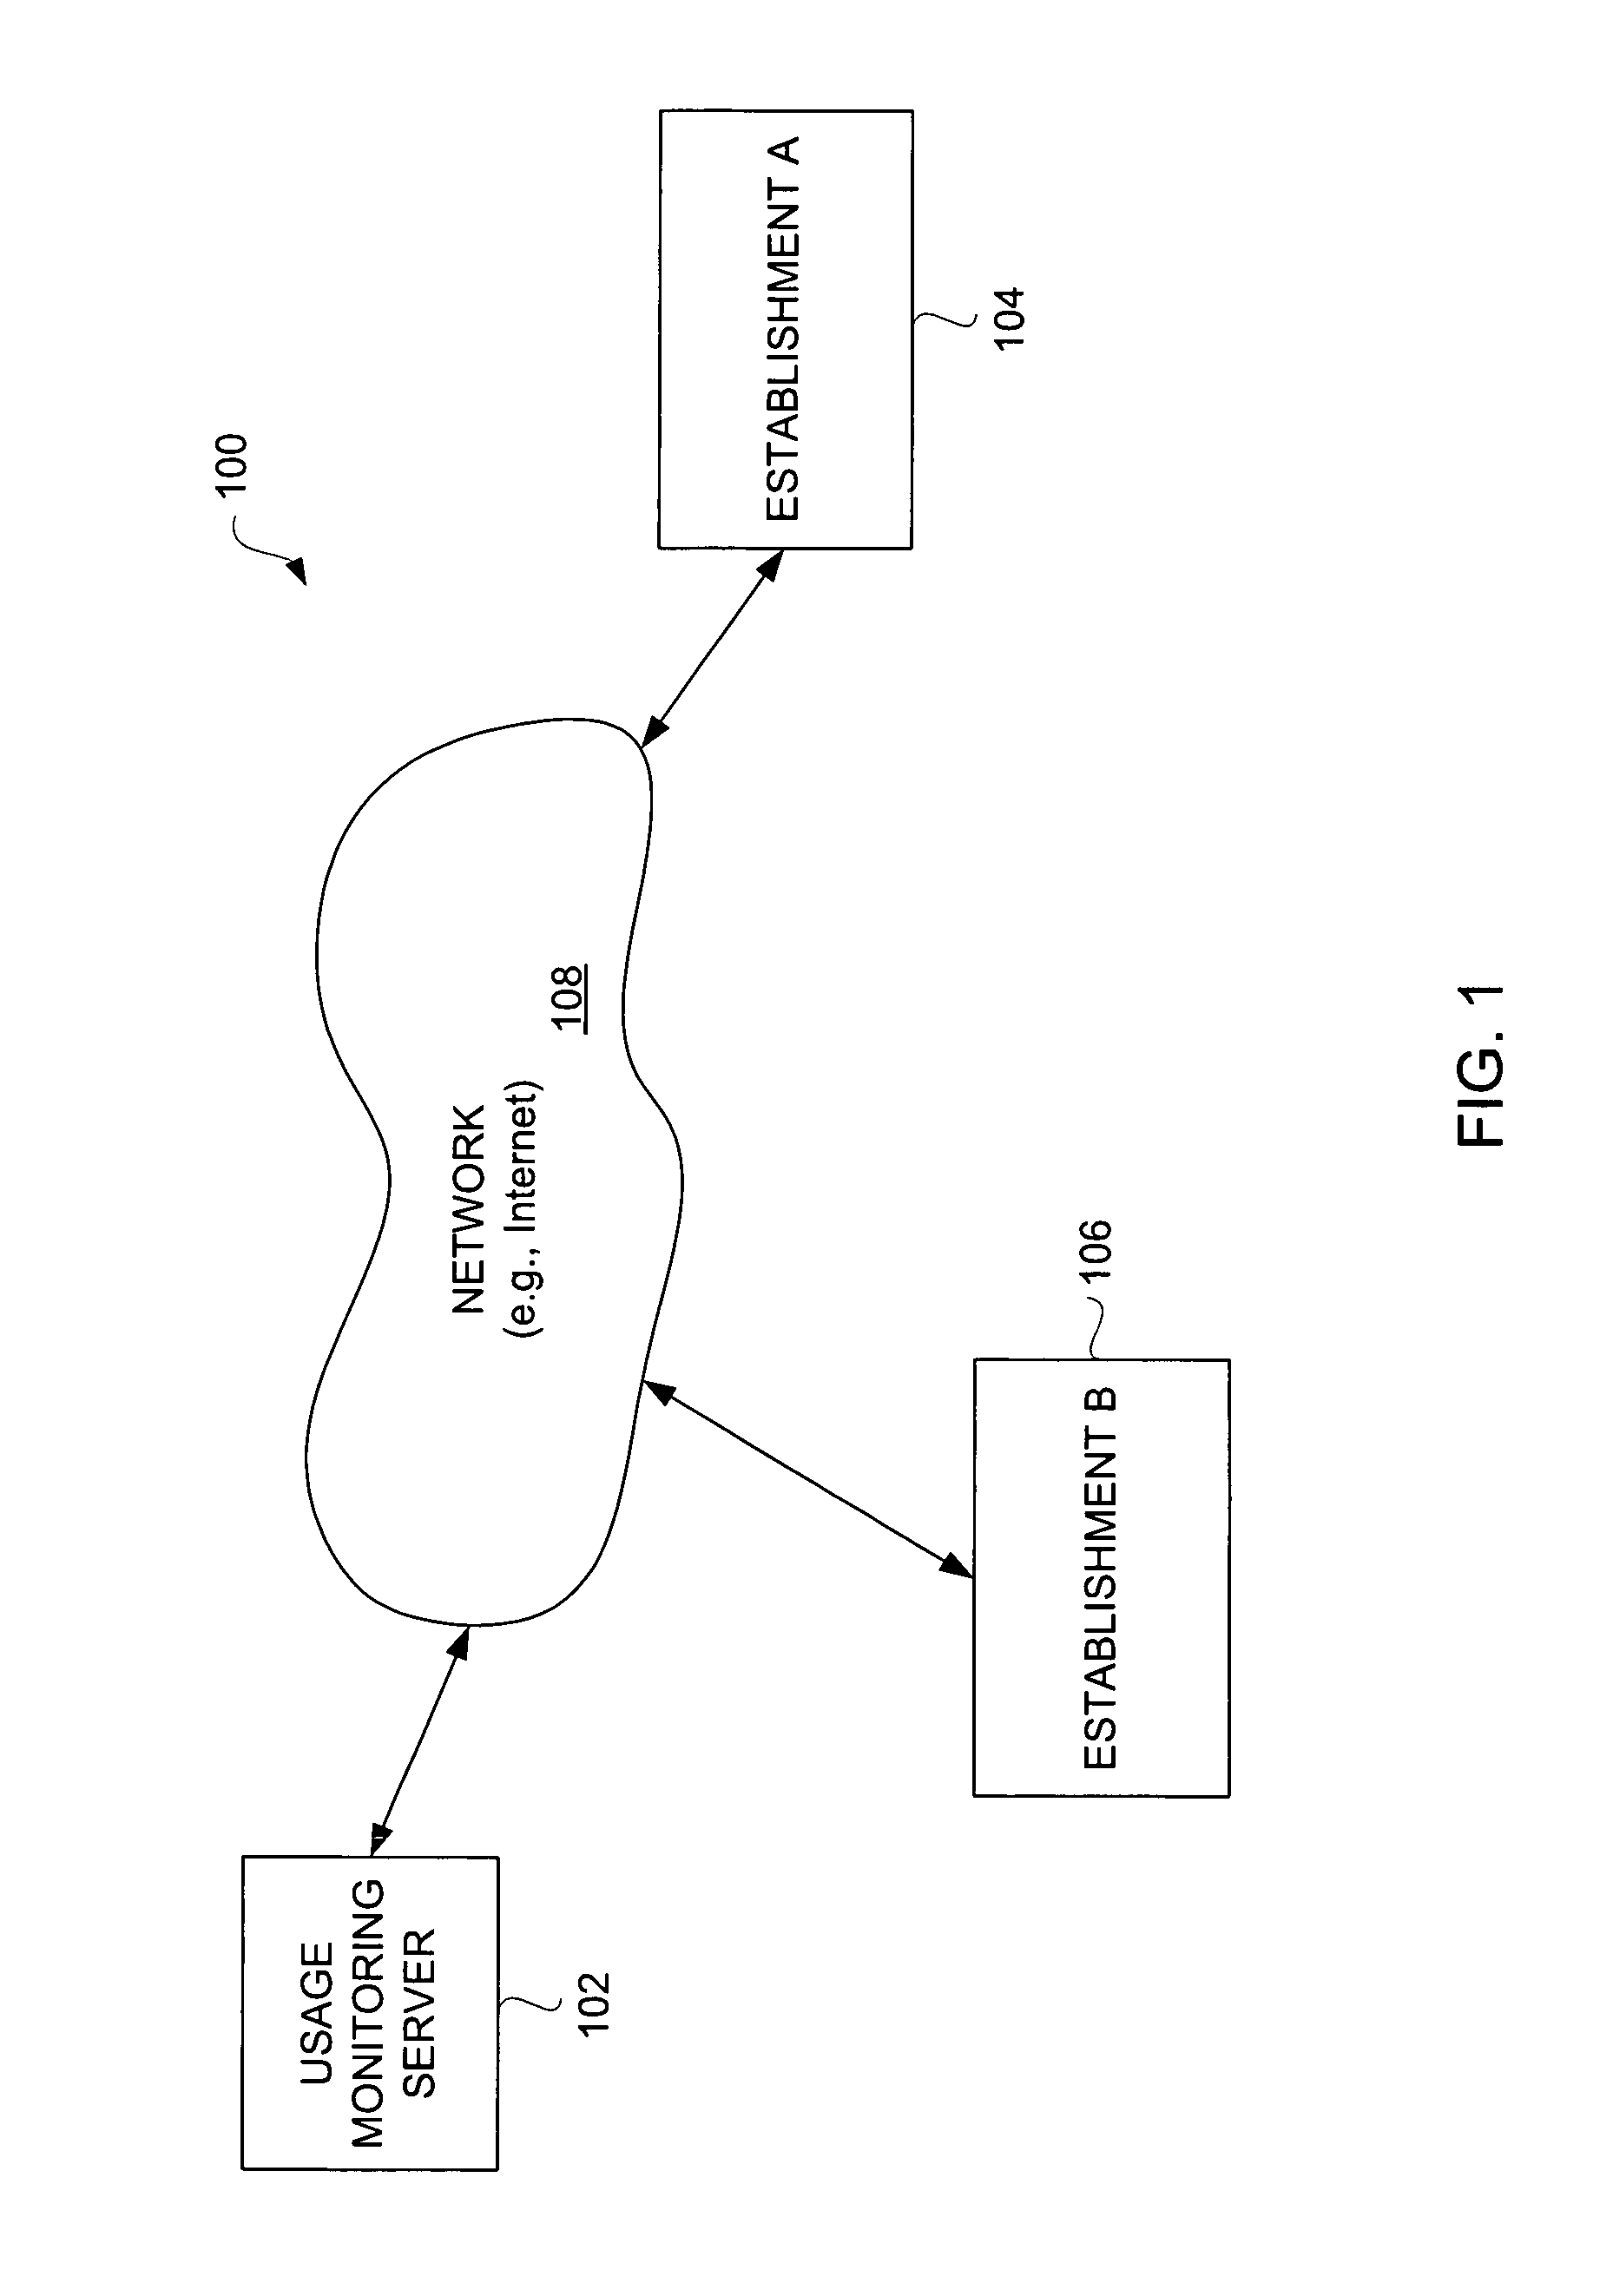 Monitoring Capabilities for Mobile Electronic Devices